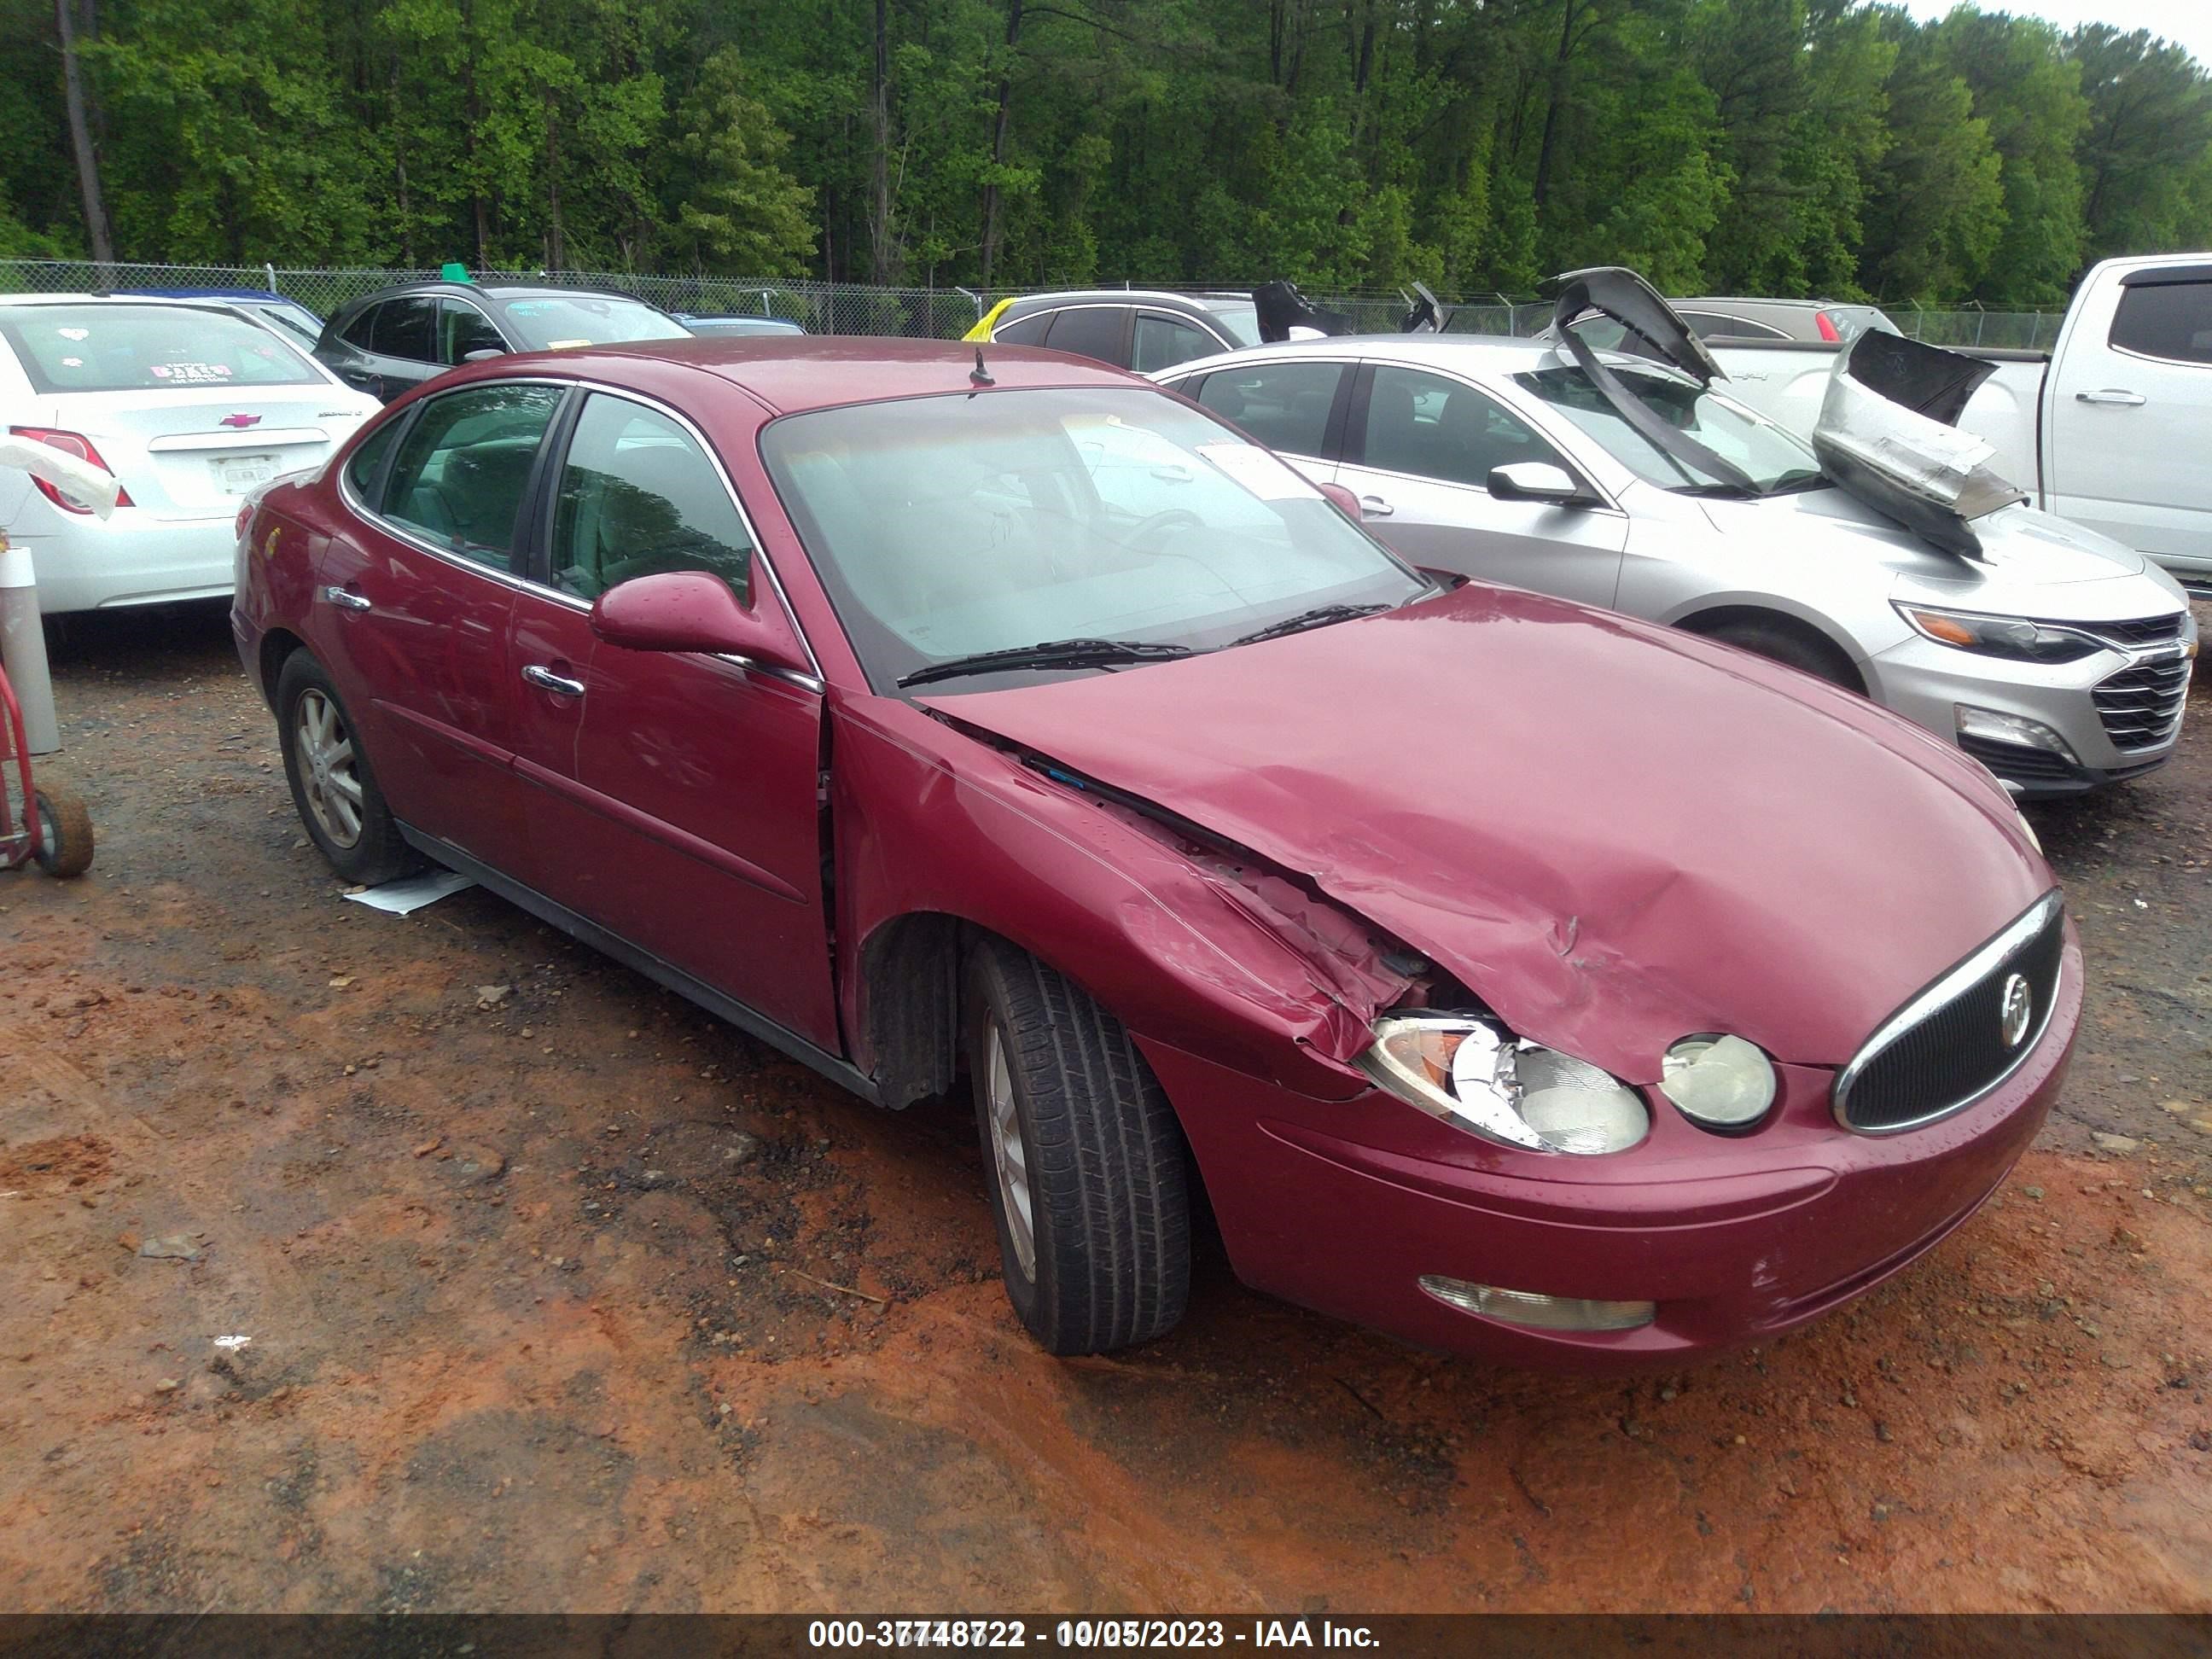 vin: 2G4WC532X51225013 2G4WC532X51225013 2005 buick lacrosse 3800 for Sale in 27520, 60 Sadisco Rd, Clayton, USA